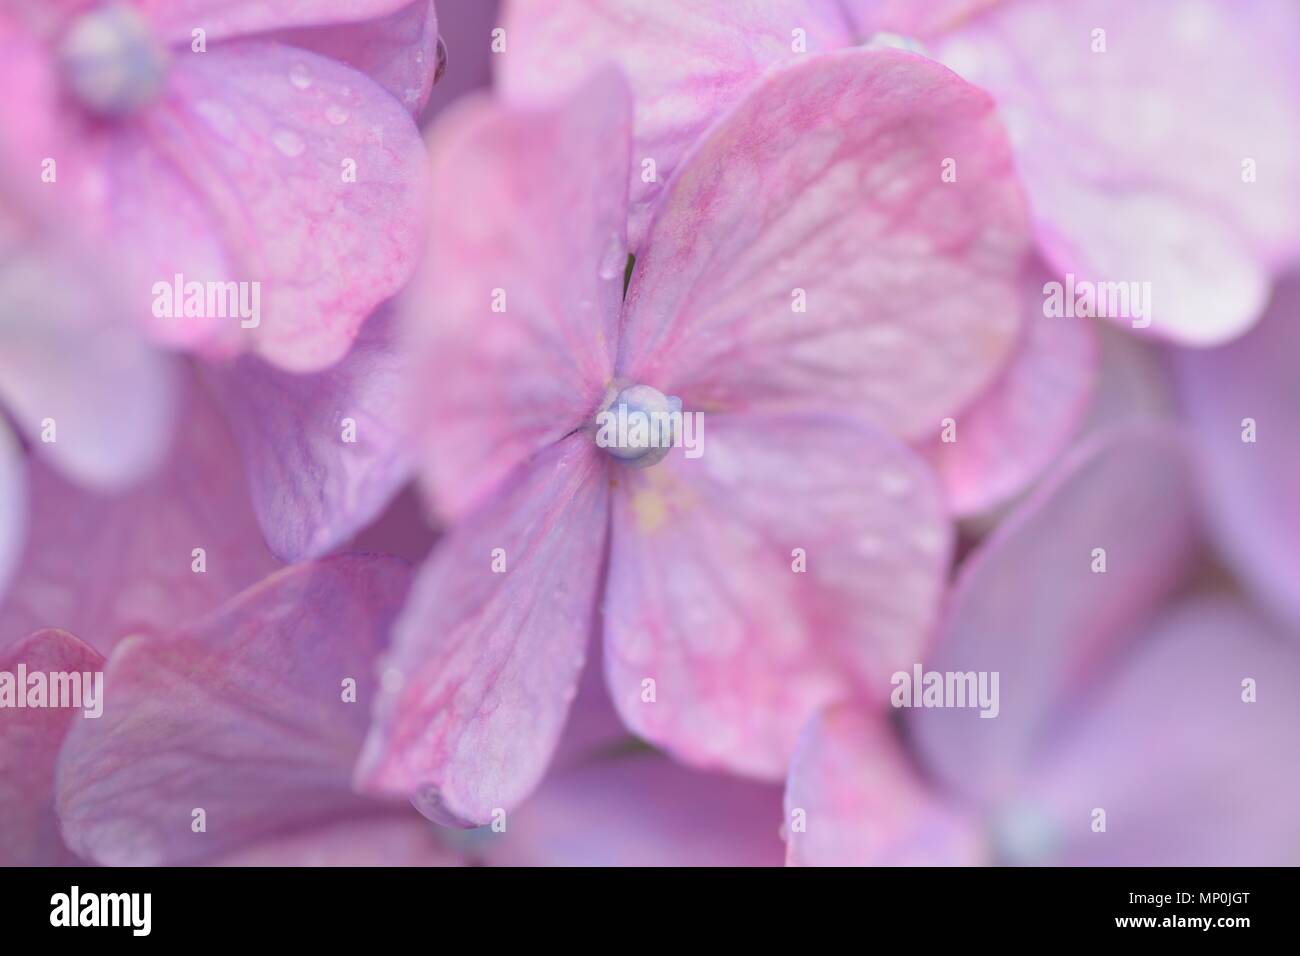 Macro texture of purple hydrangea flowers with water droplets Stock Photo